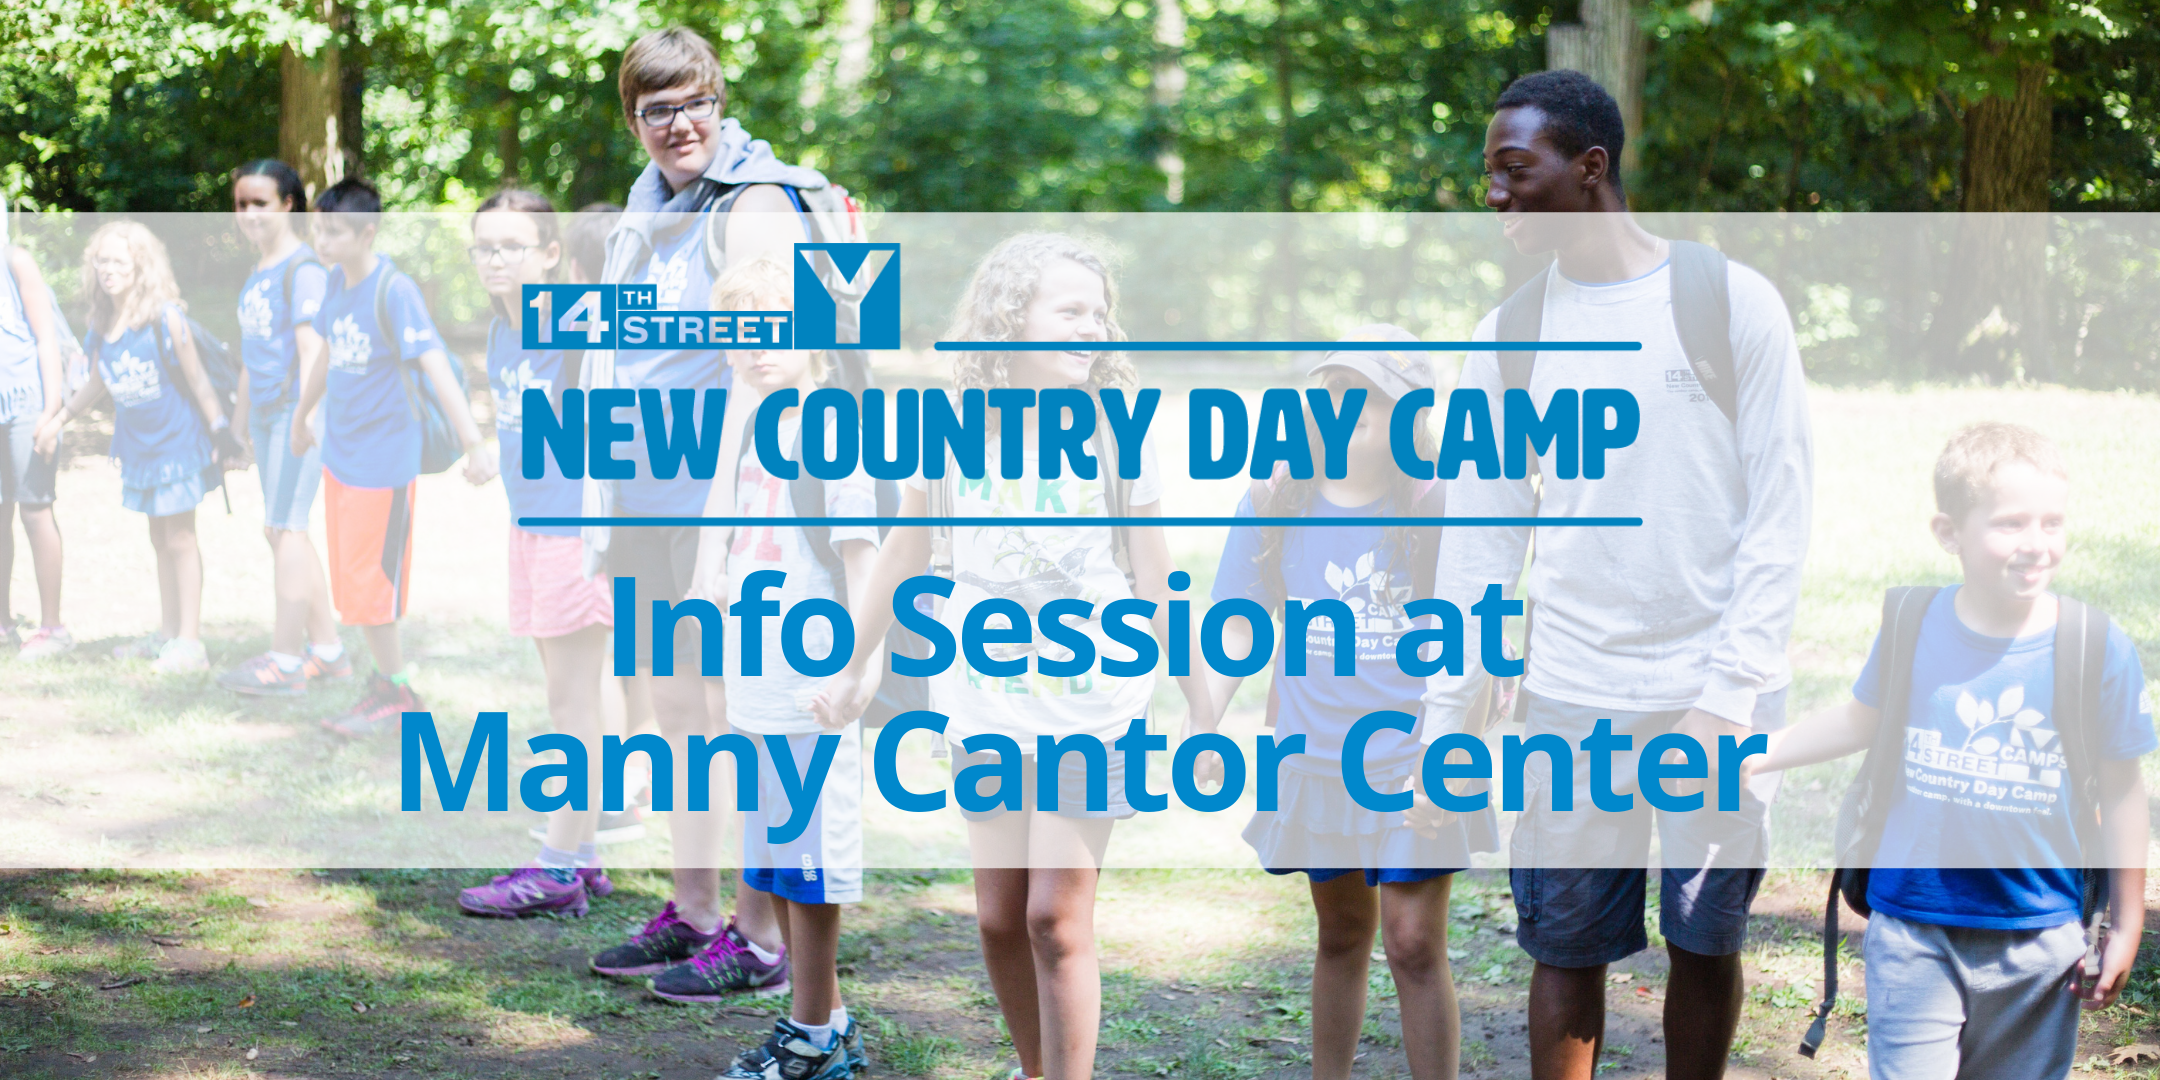 New Country Day Camp Information Session